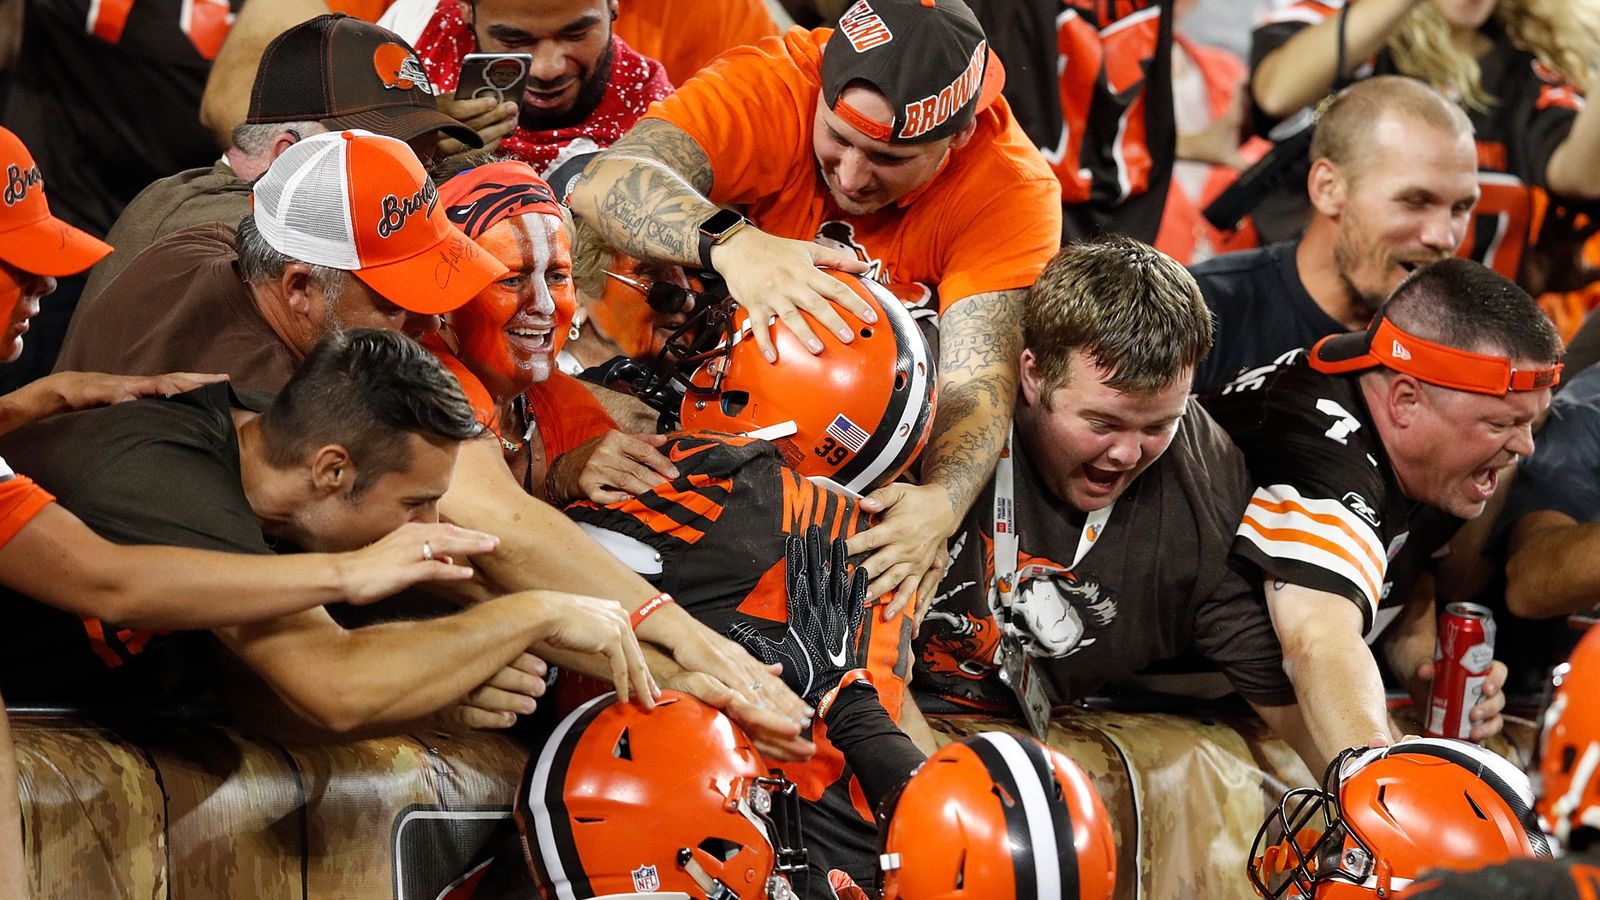 NFL's Cleveland Browns finally get victory to end twoyear winless